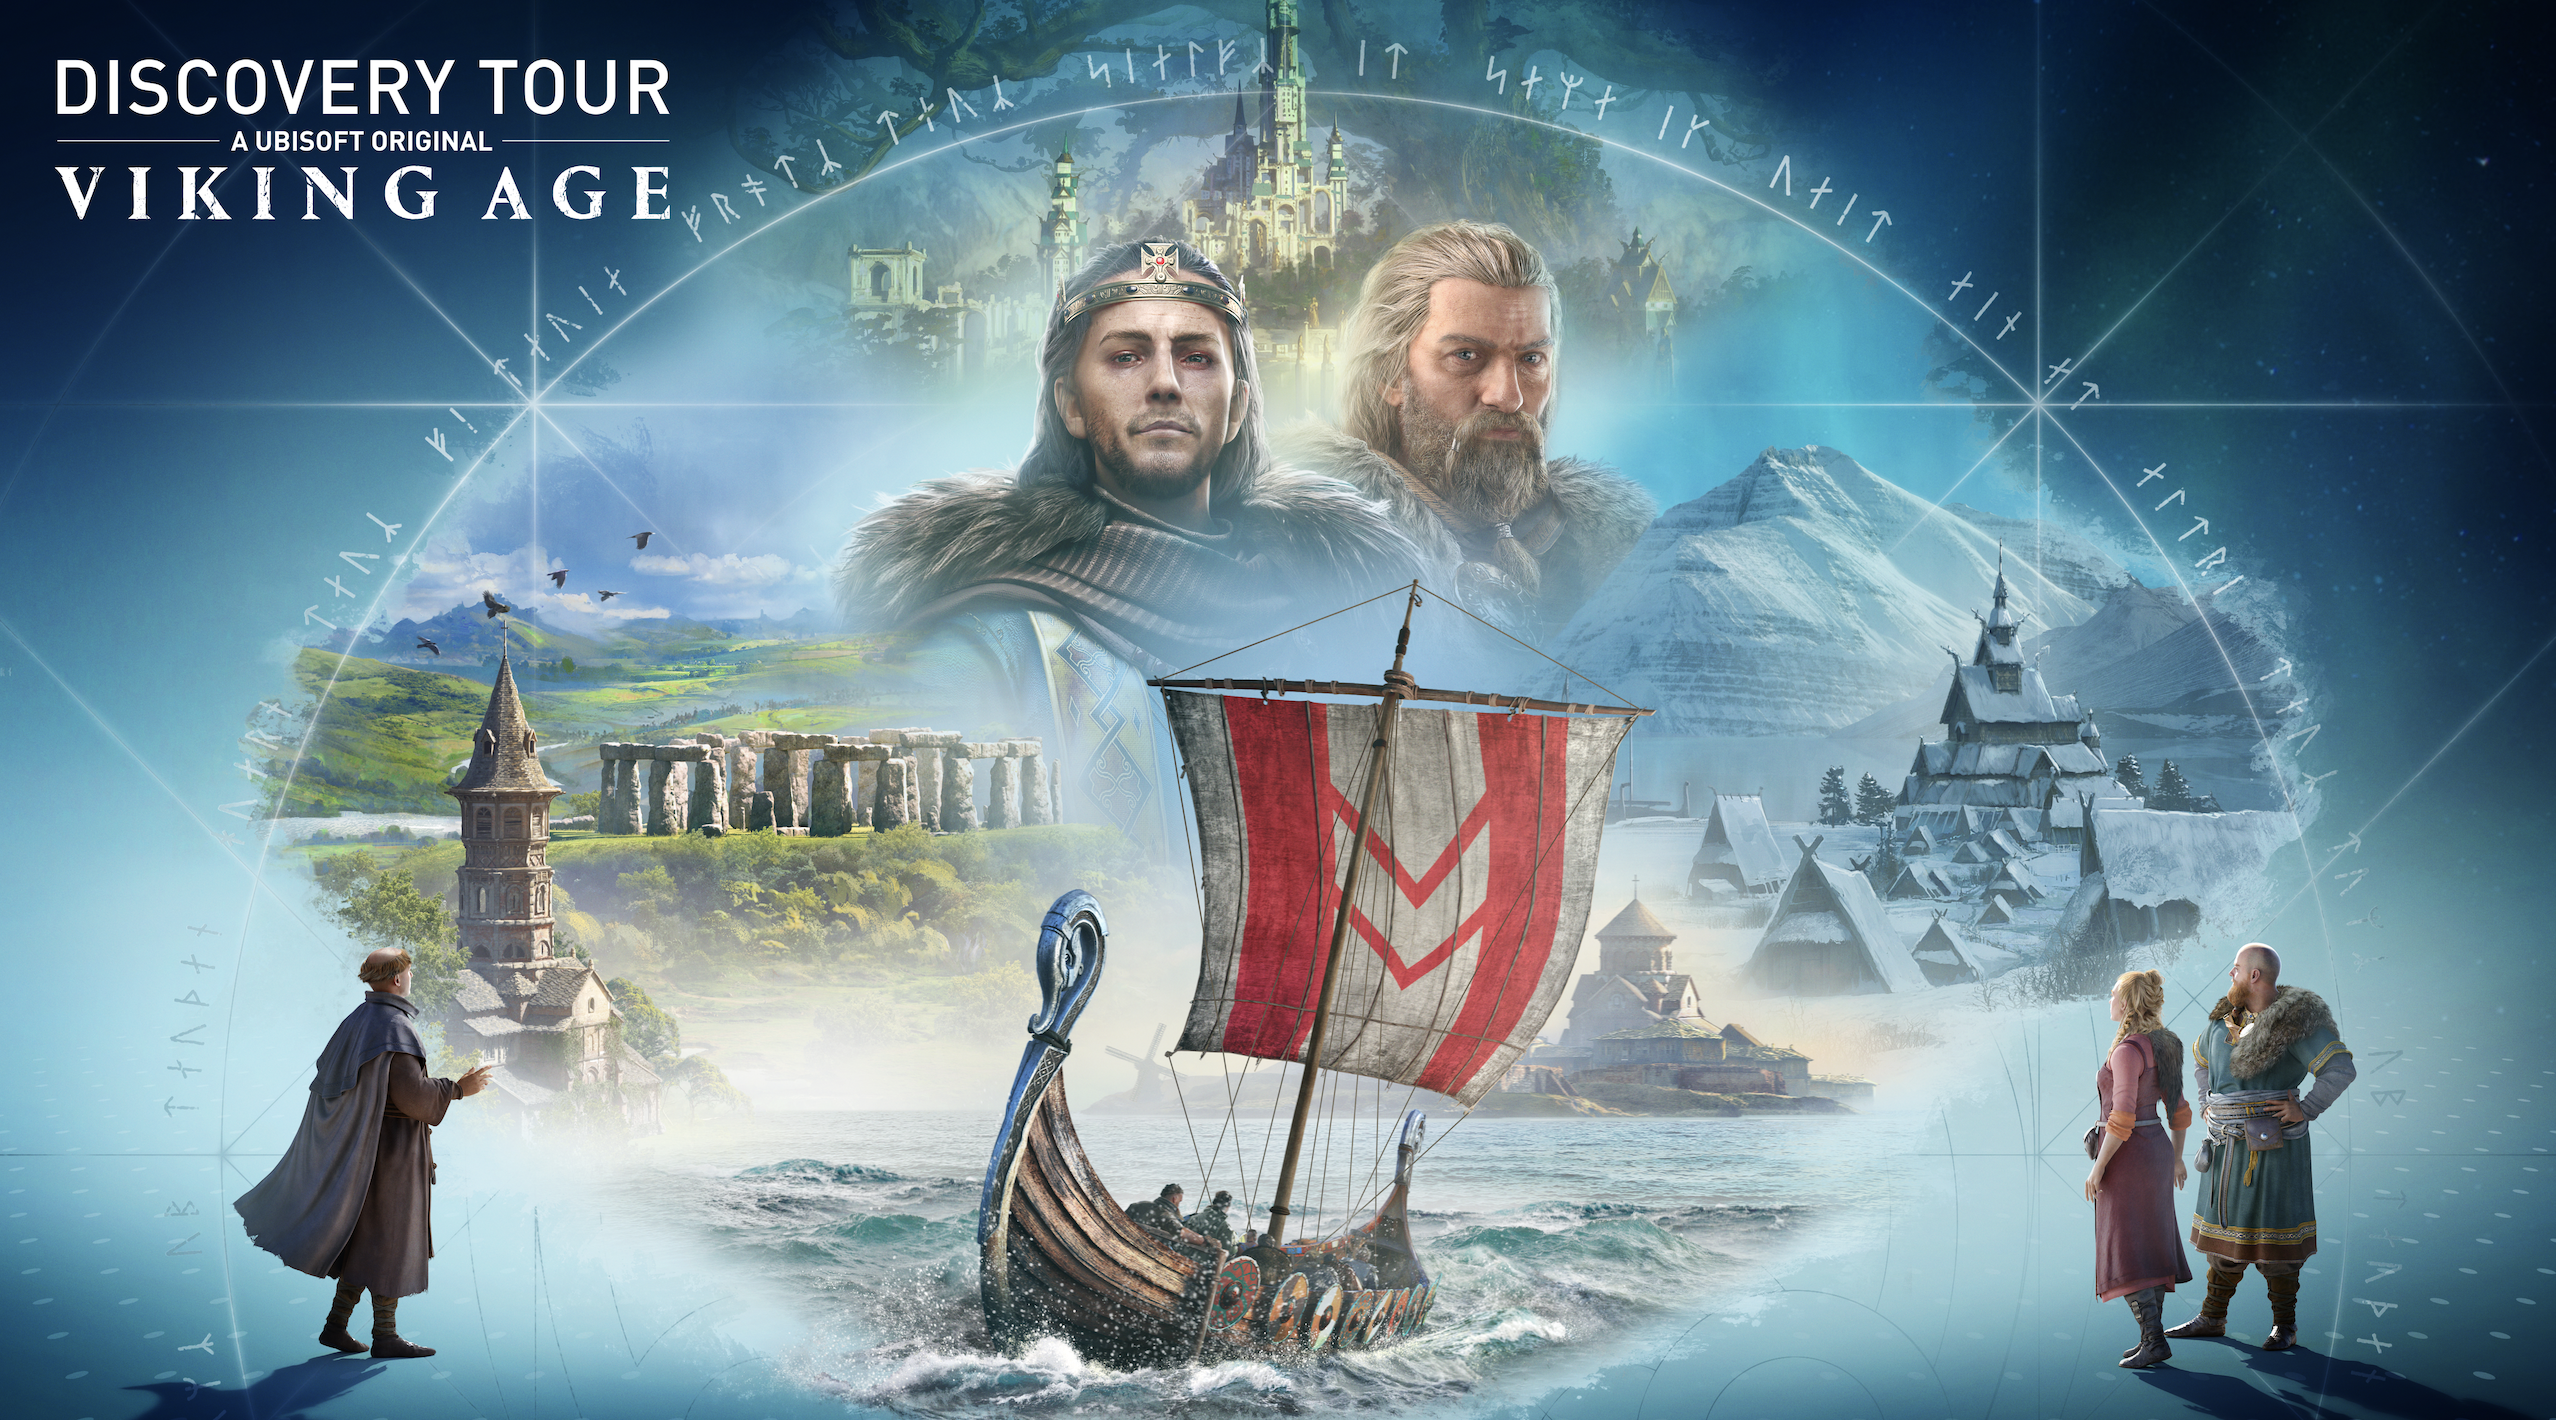 Ubisoft's 'Assassin's Creed: Discovery Tour Viking Age' Is Now Available